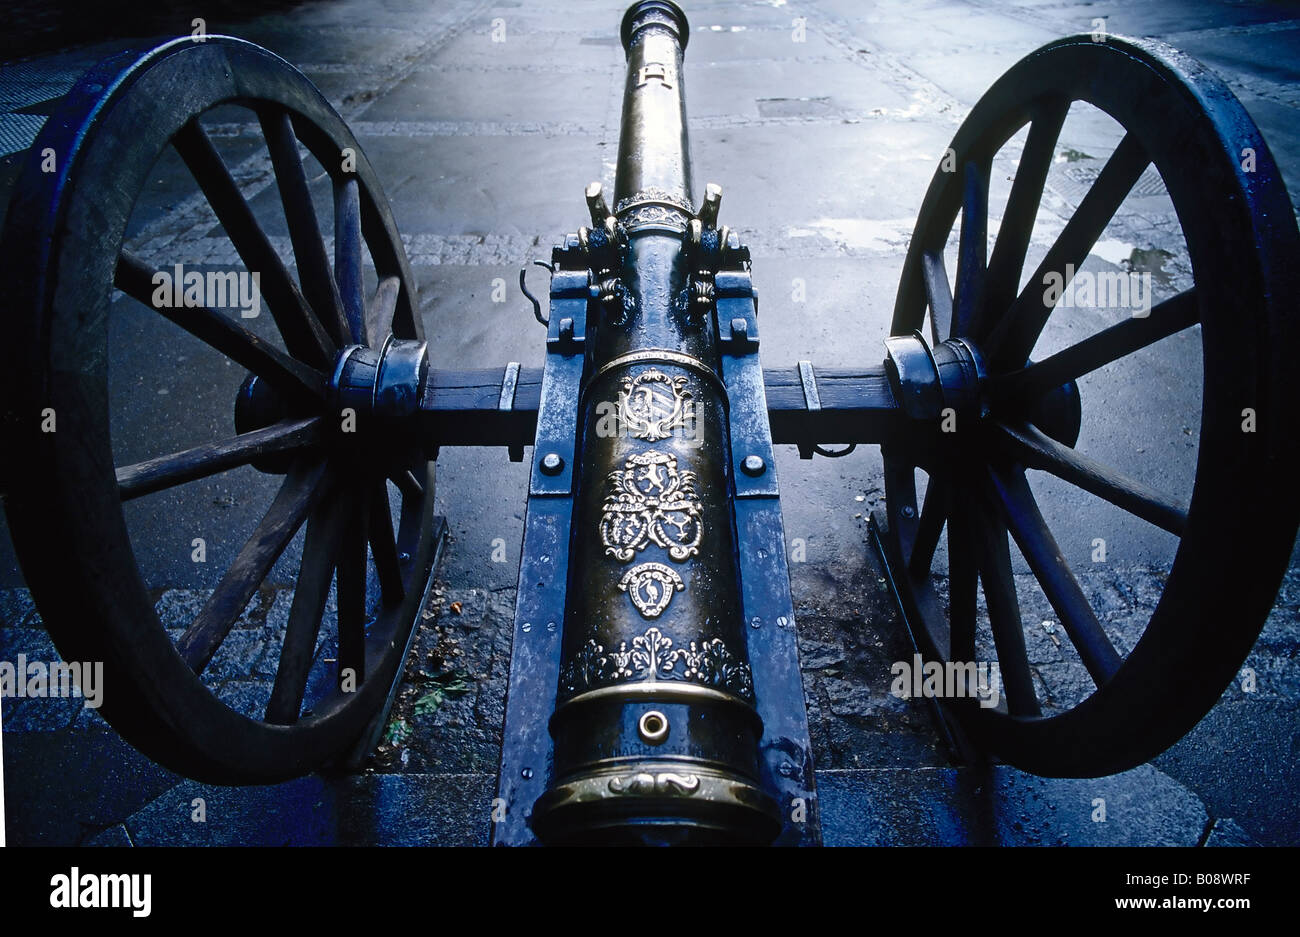 Prussian cannon with decorative coat of arms on gun carriage, inner courtyard of Hohenzollern Castle near Hechingen, Swabian Al Stock Photo